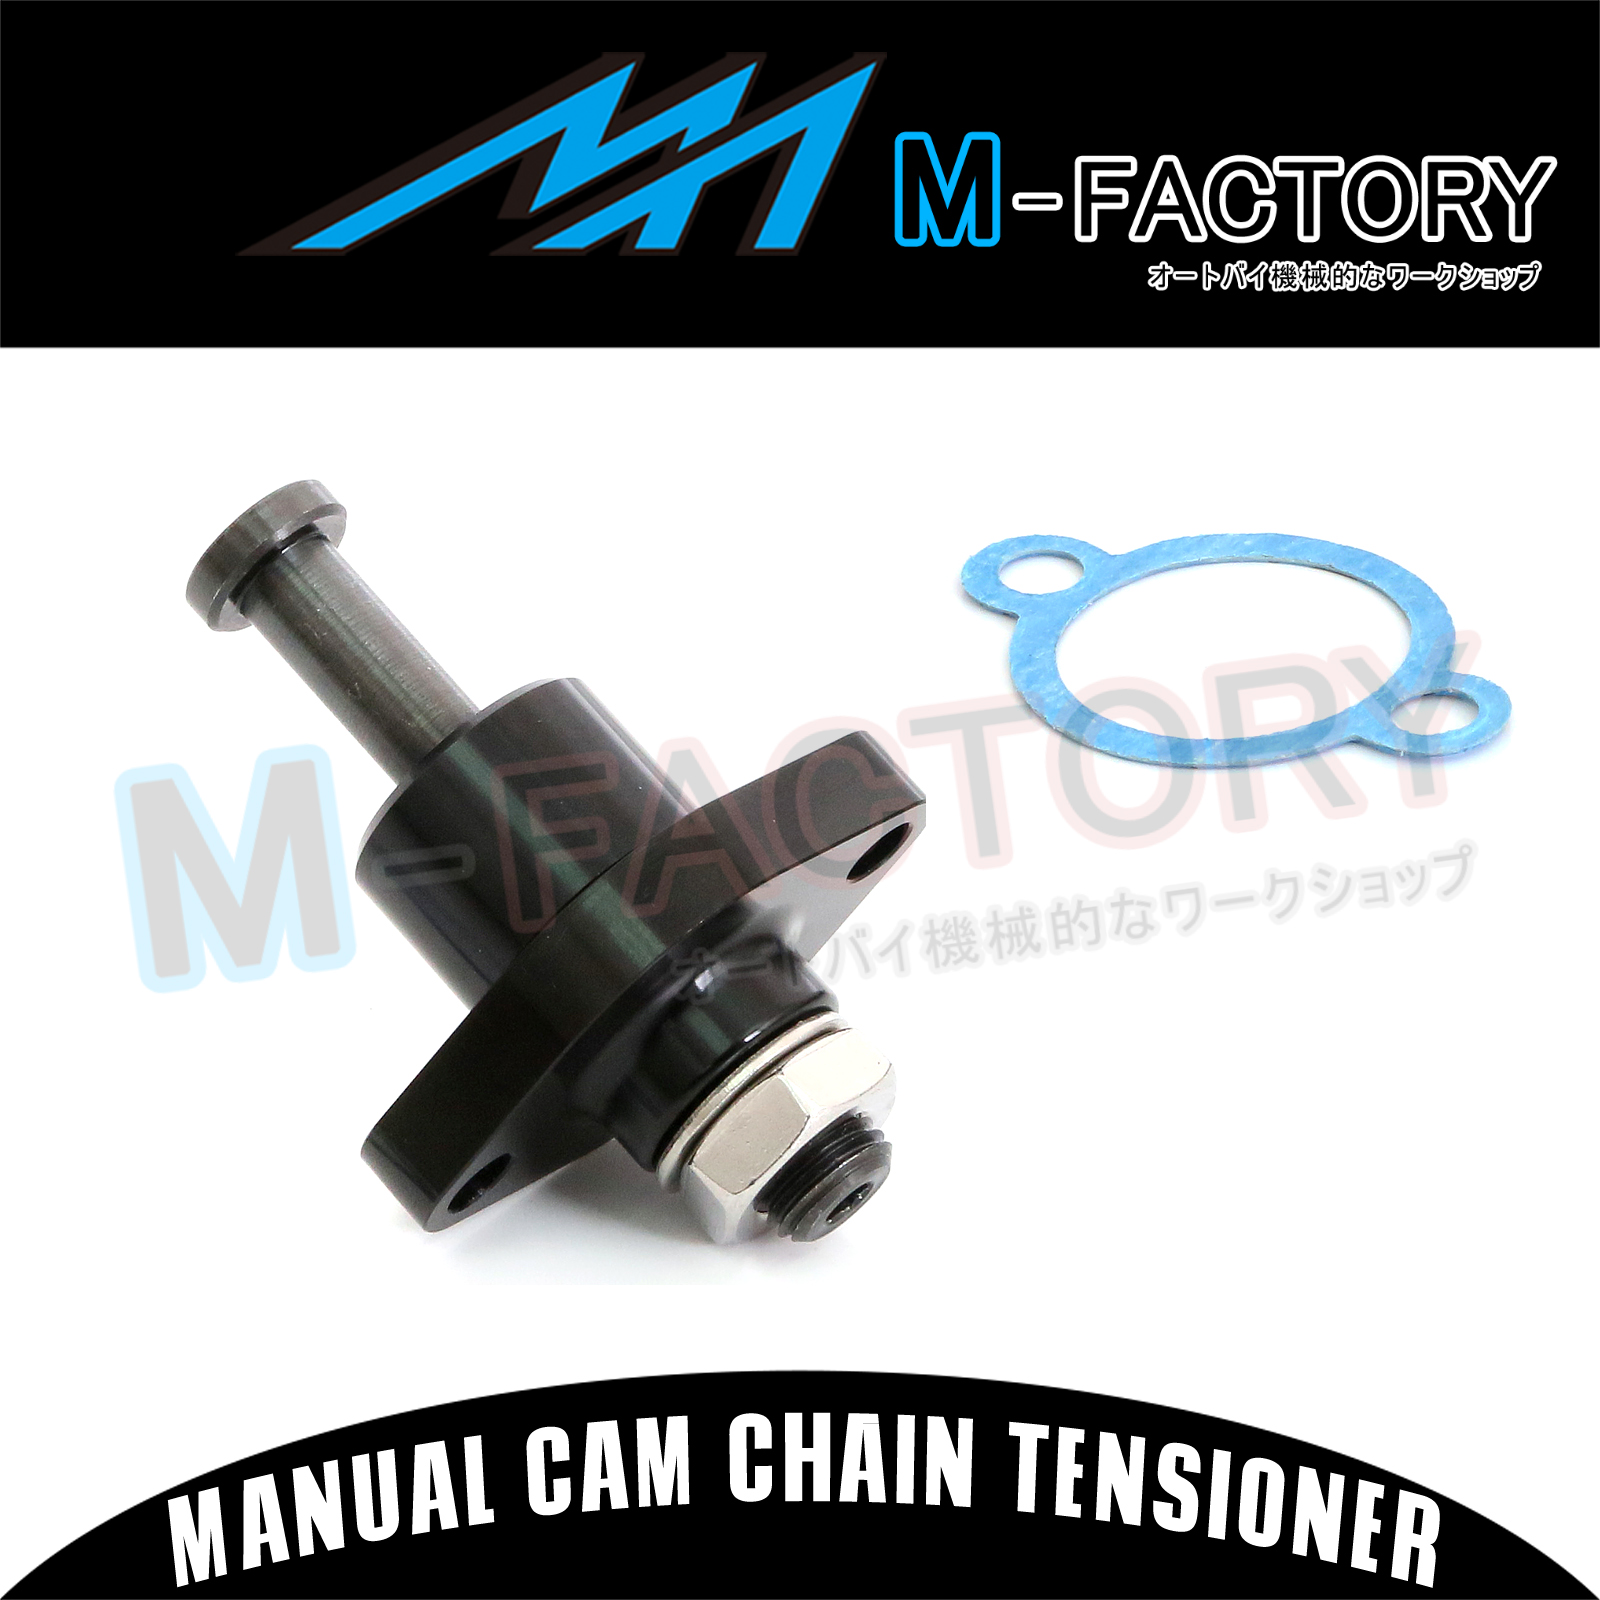 New Black Billet Manual Cam Chain Tensioner Fit Yamaha YZ250F 14-16 14